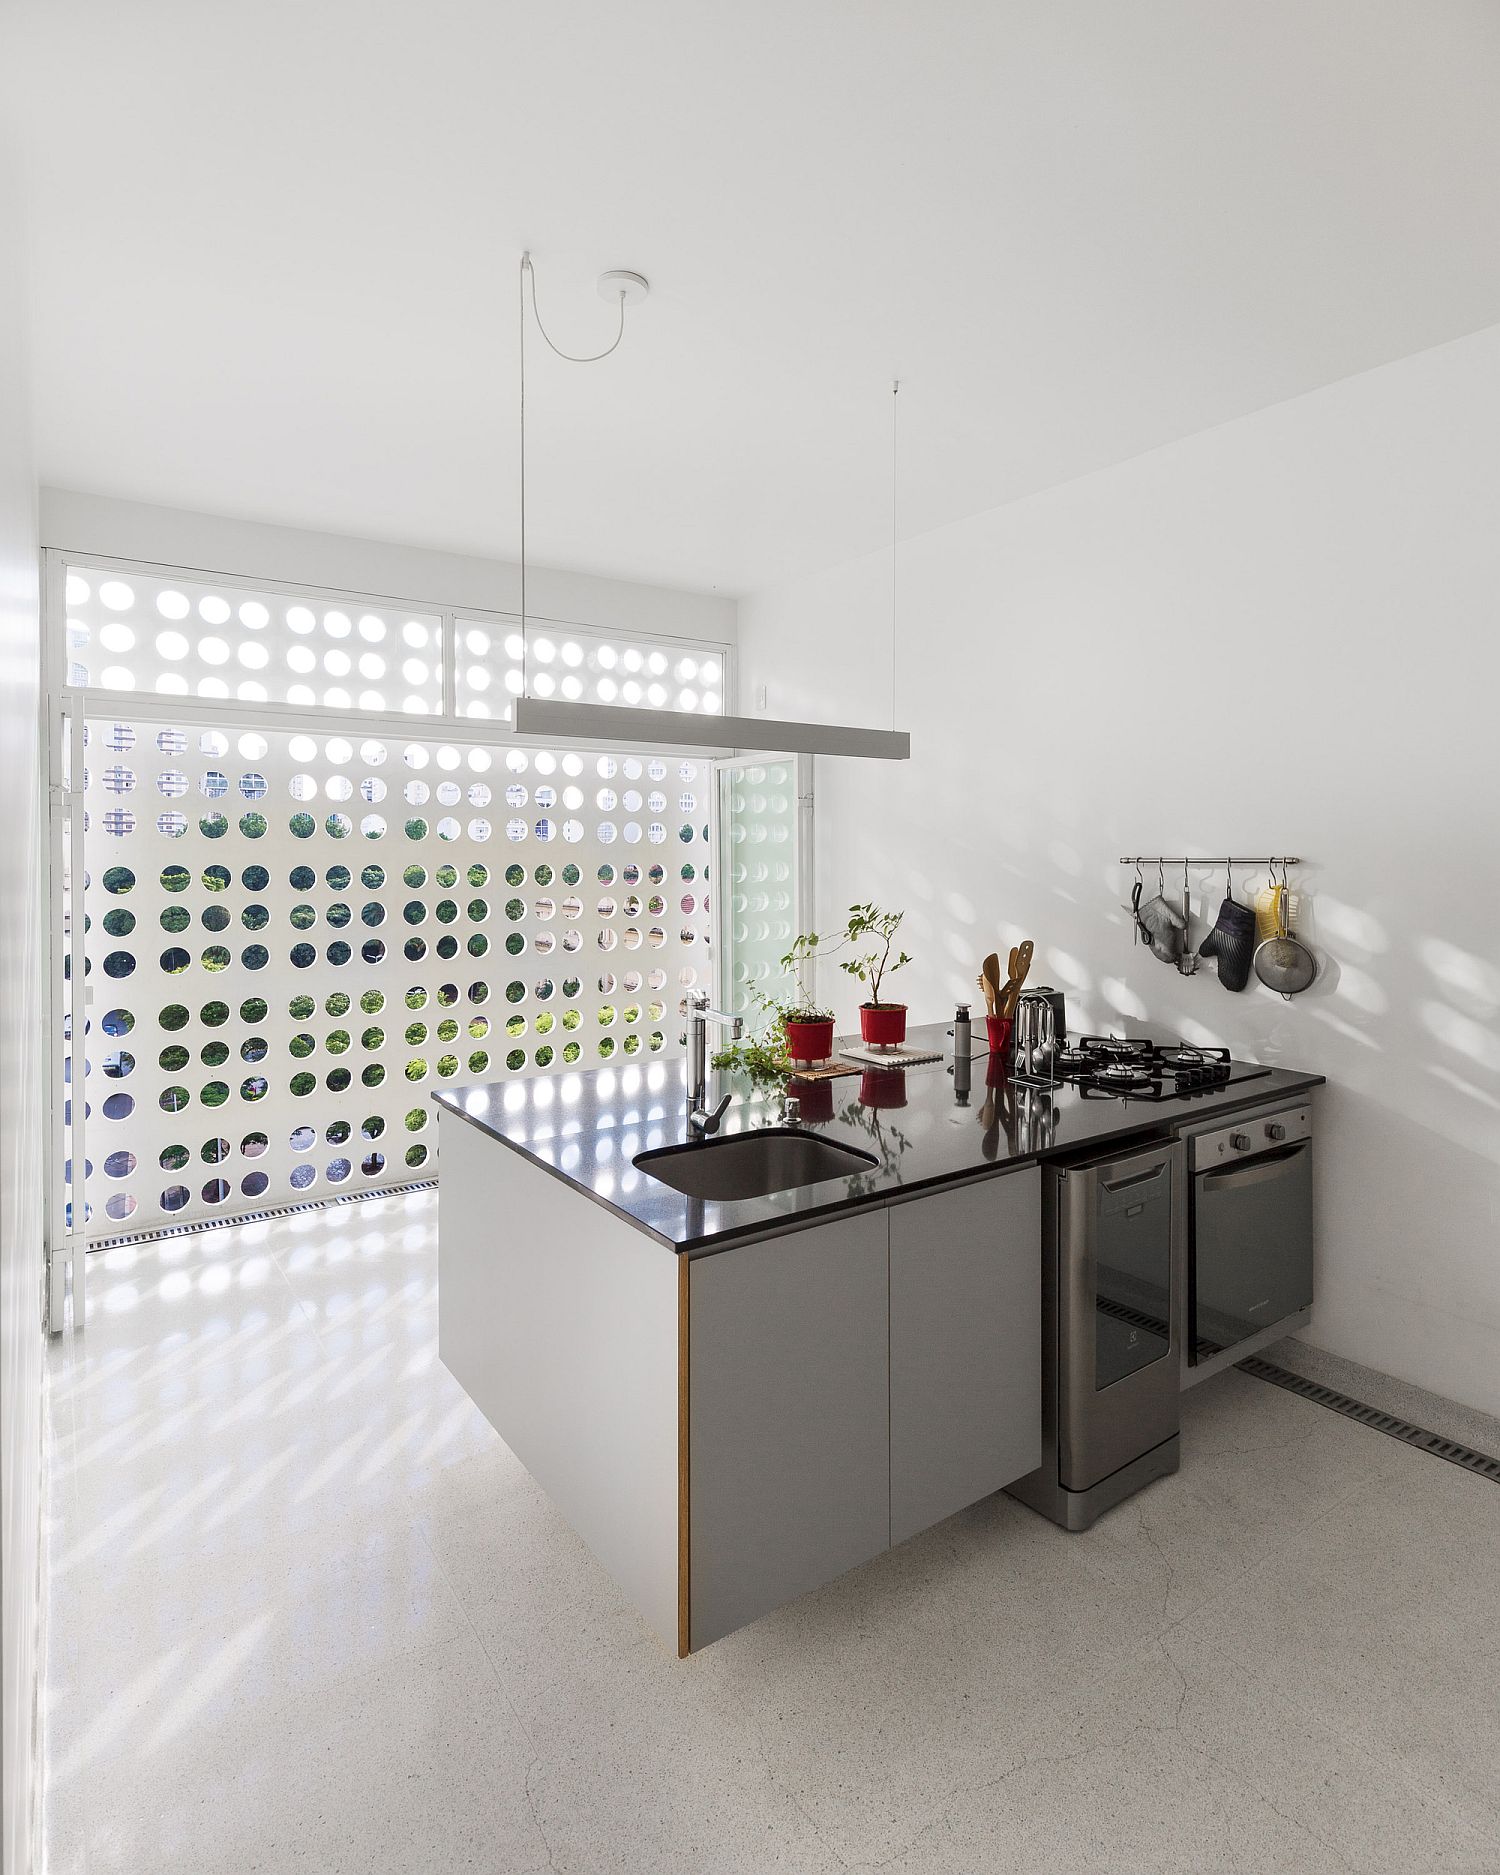 Concrete-wall-with-circular-cutouts-brings-light-into-the-kitchen